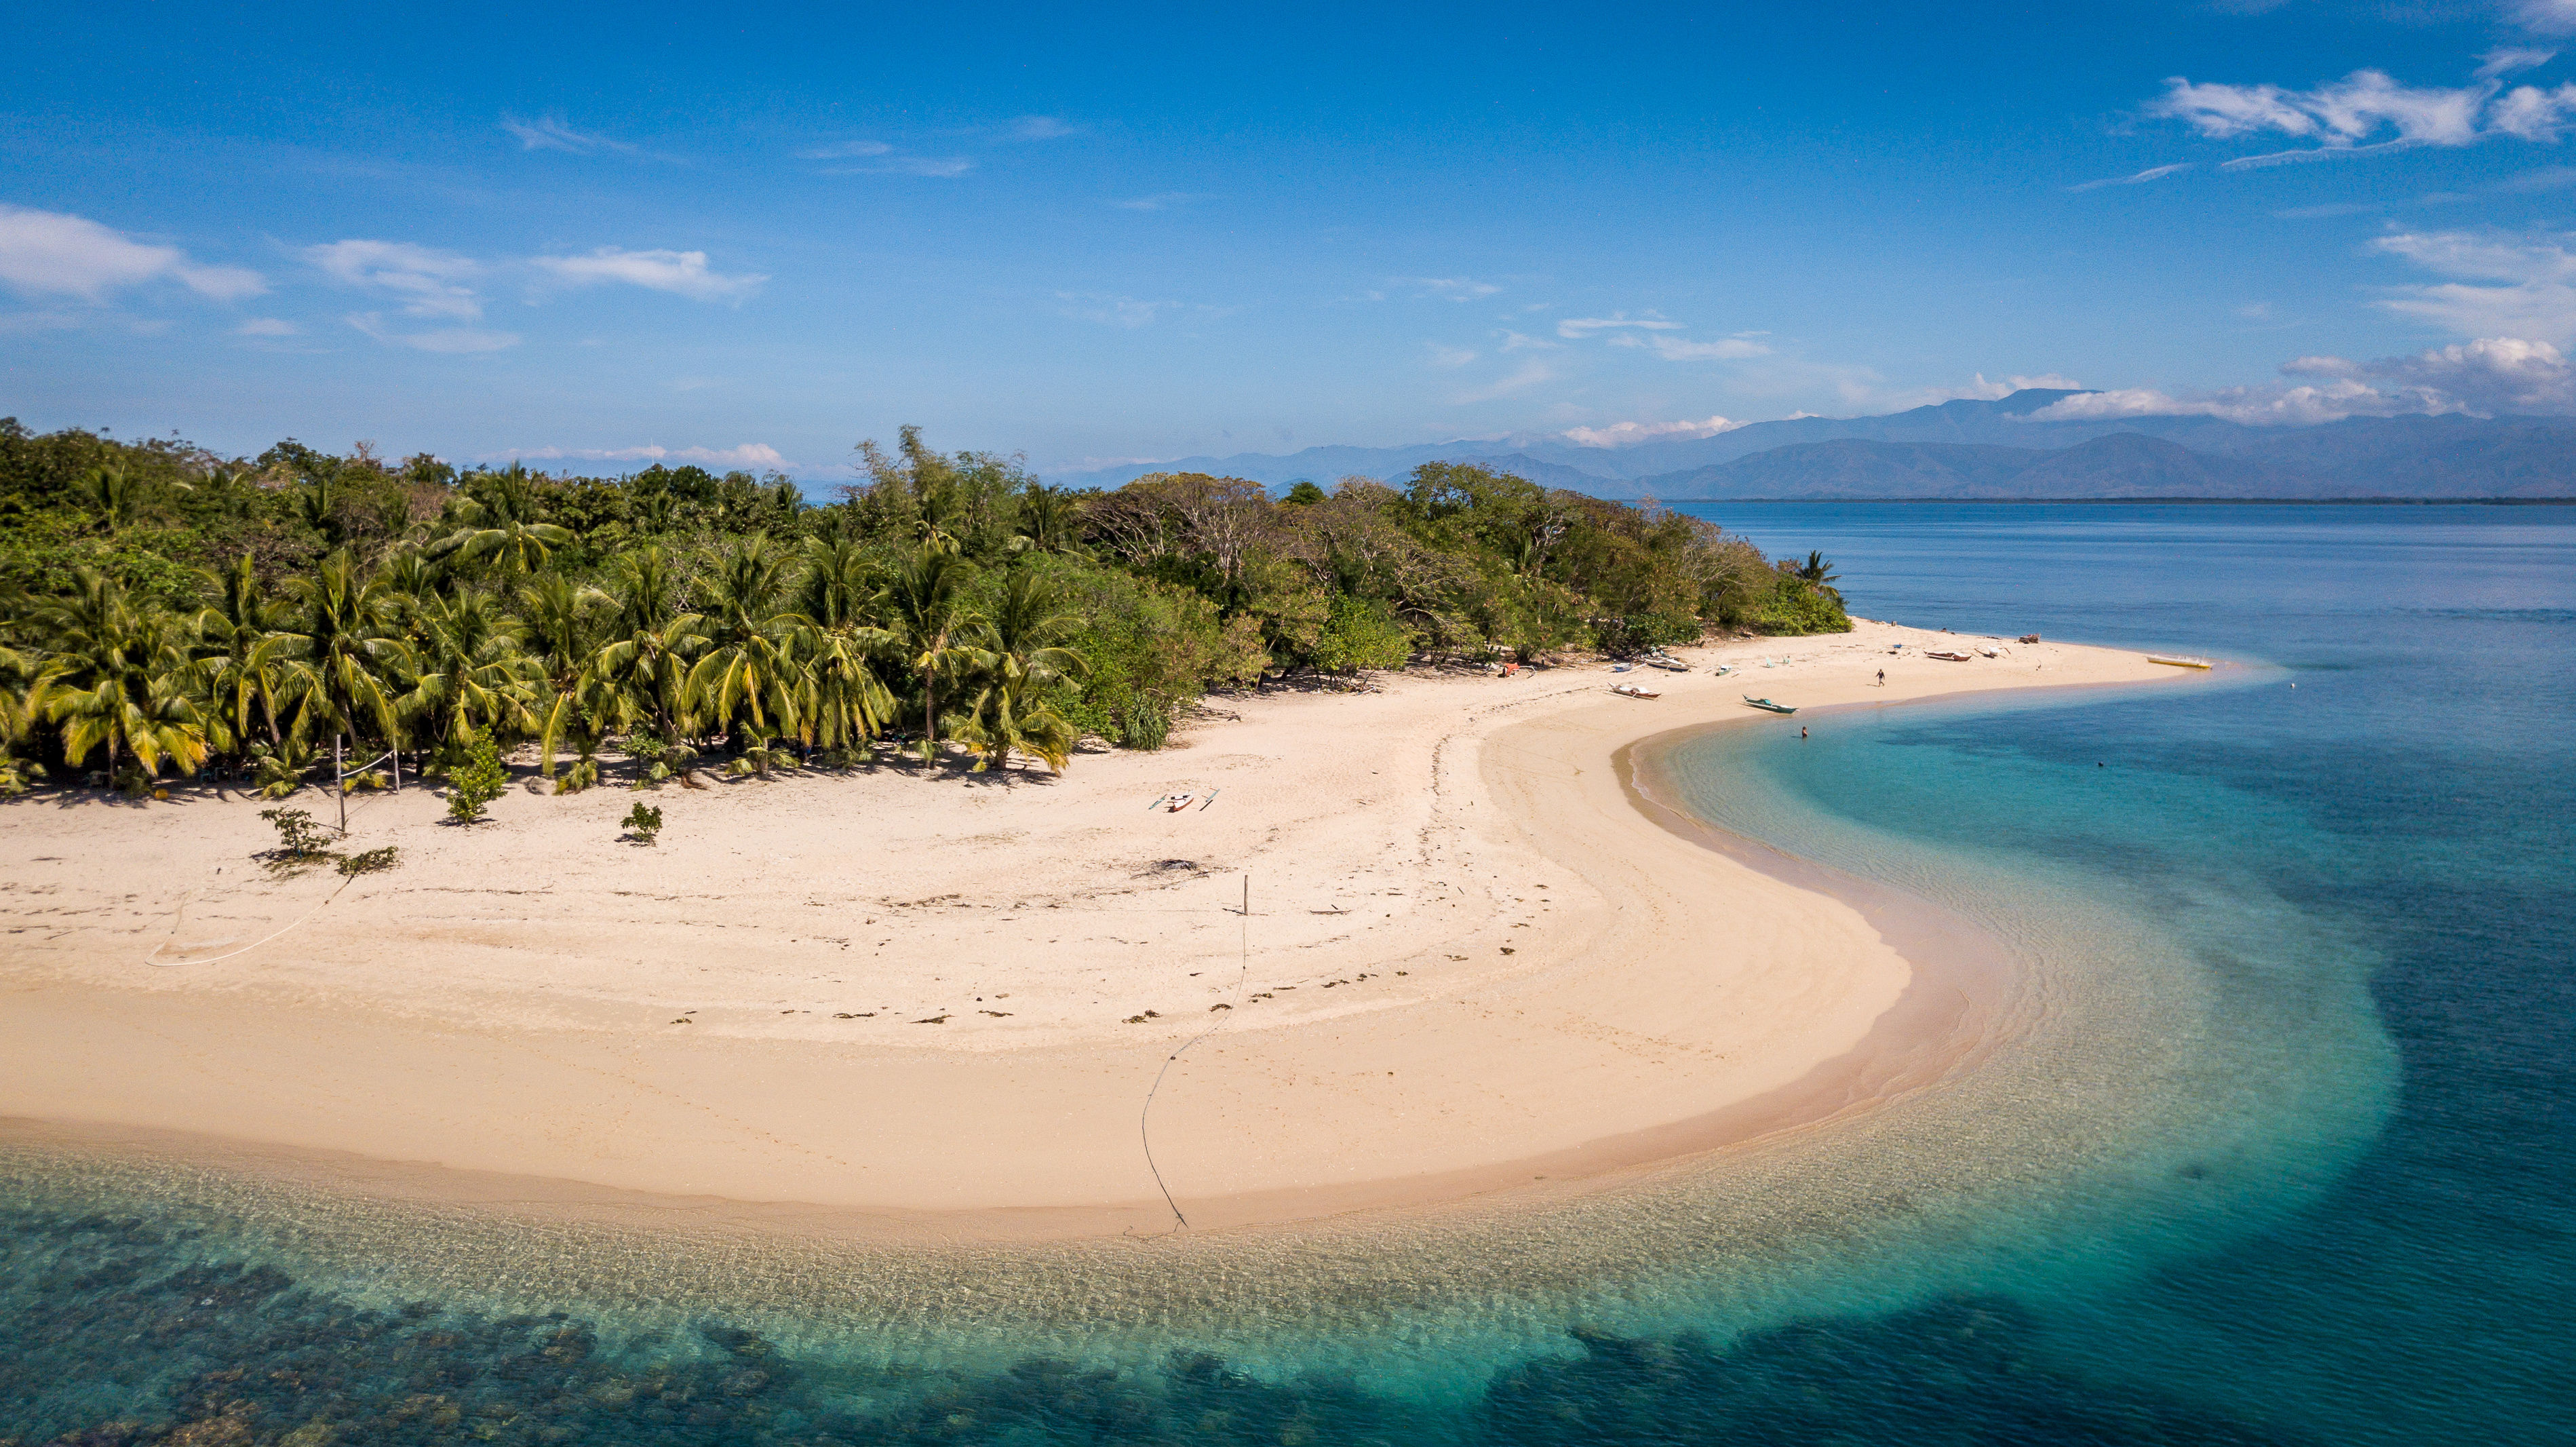 Aerial view of white sand tropical island of Mindoro with green palm trees and surrounded by clear turquoise waters, Philippines. 